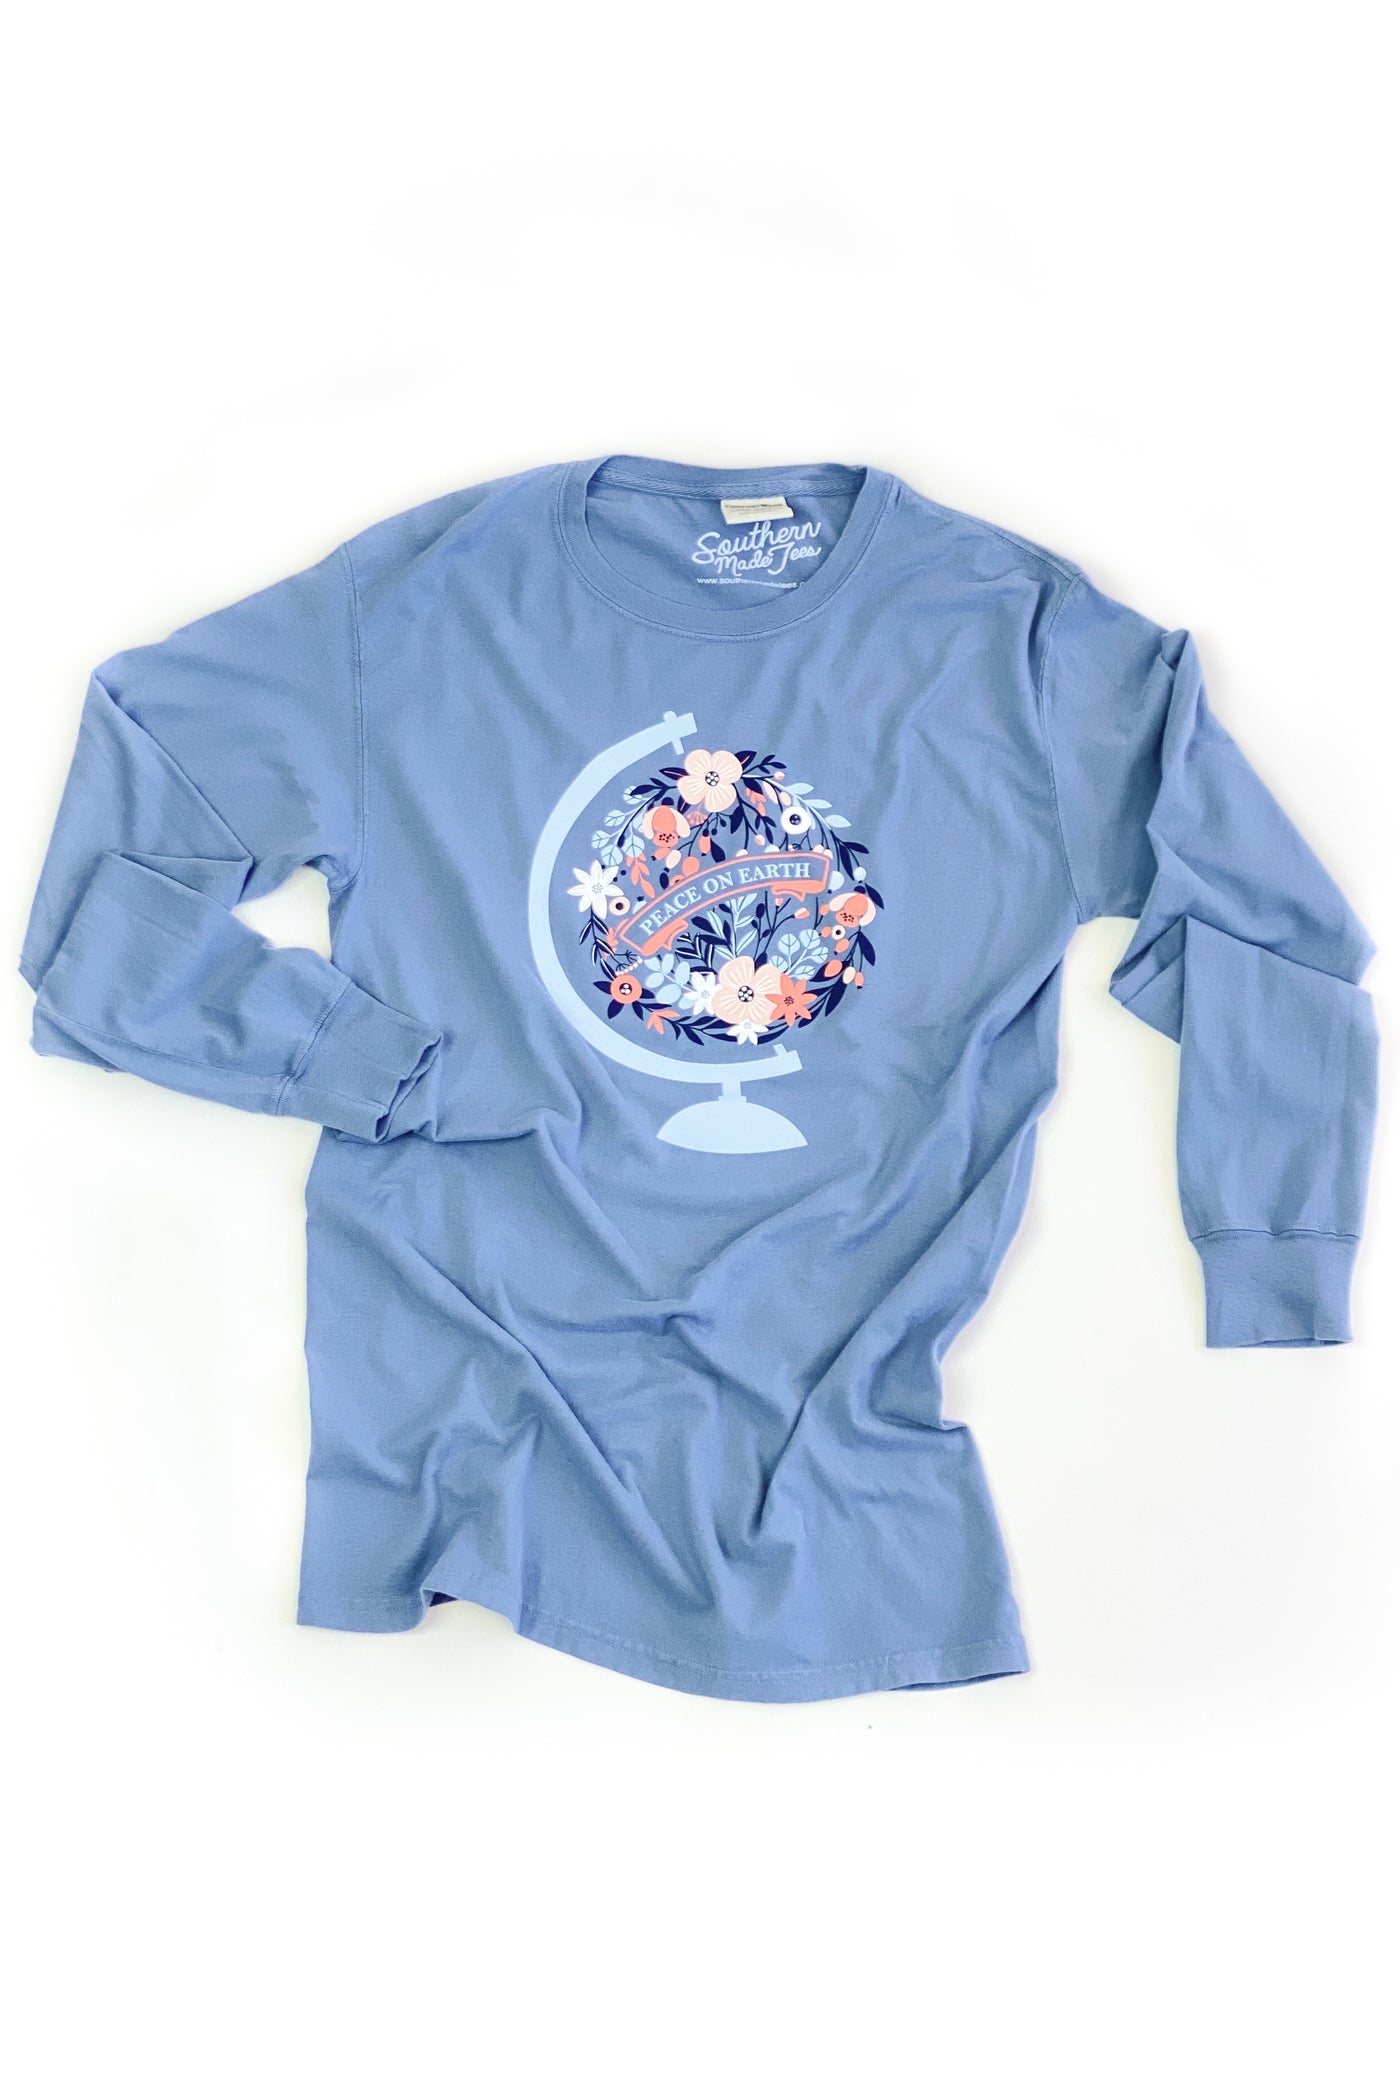 "Peace On Earth" Graphic Tee L/S - SALE